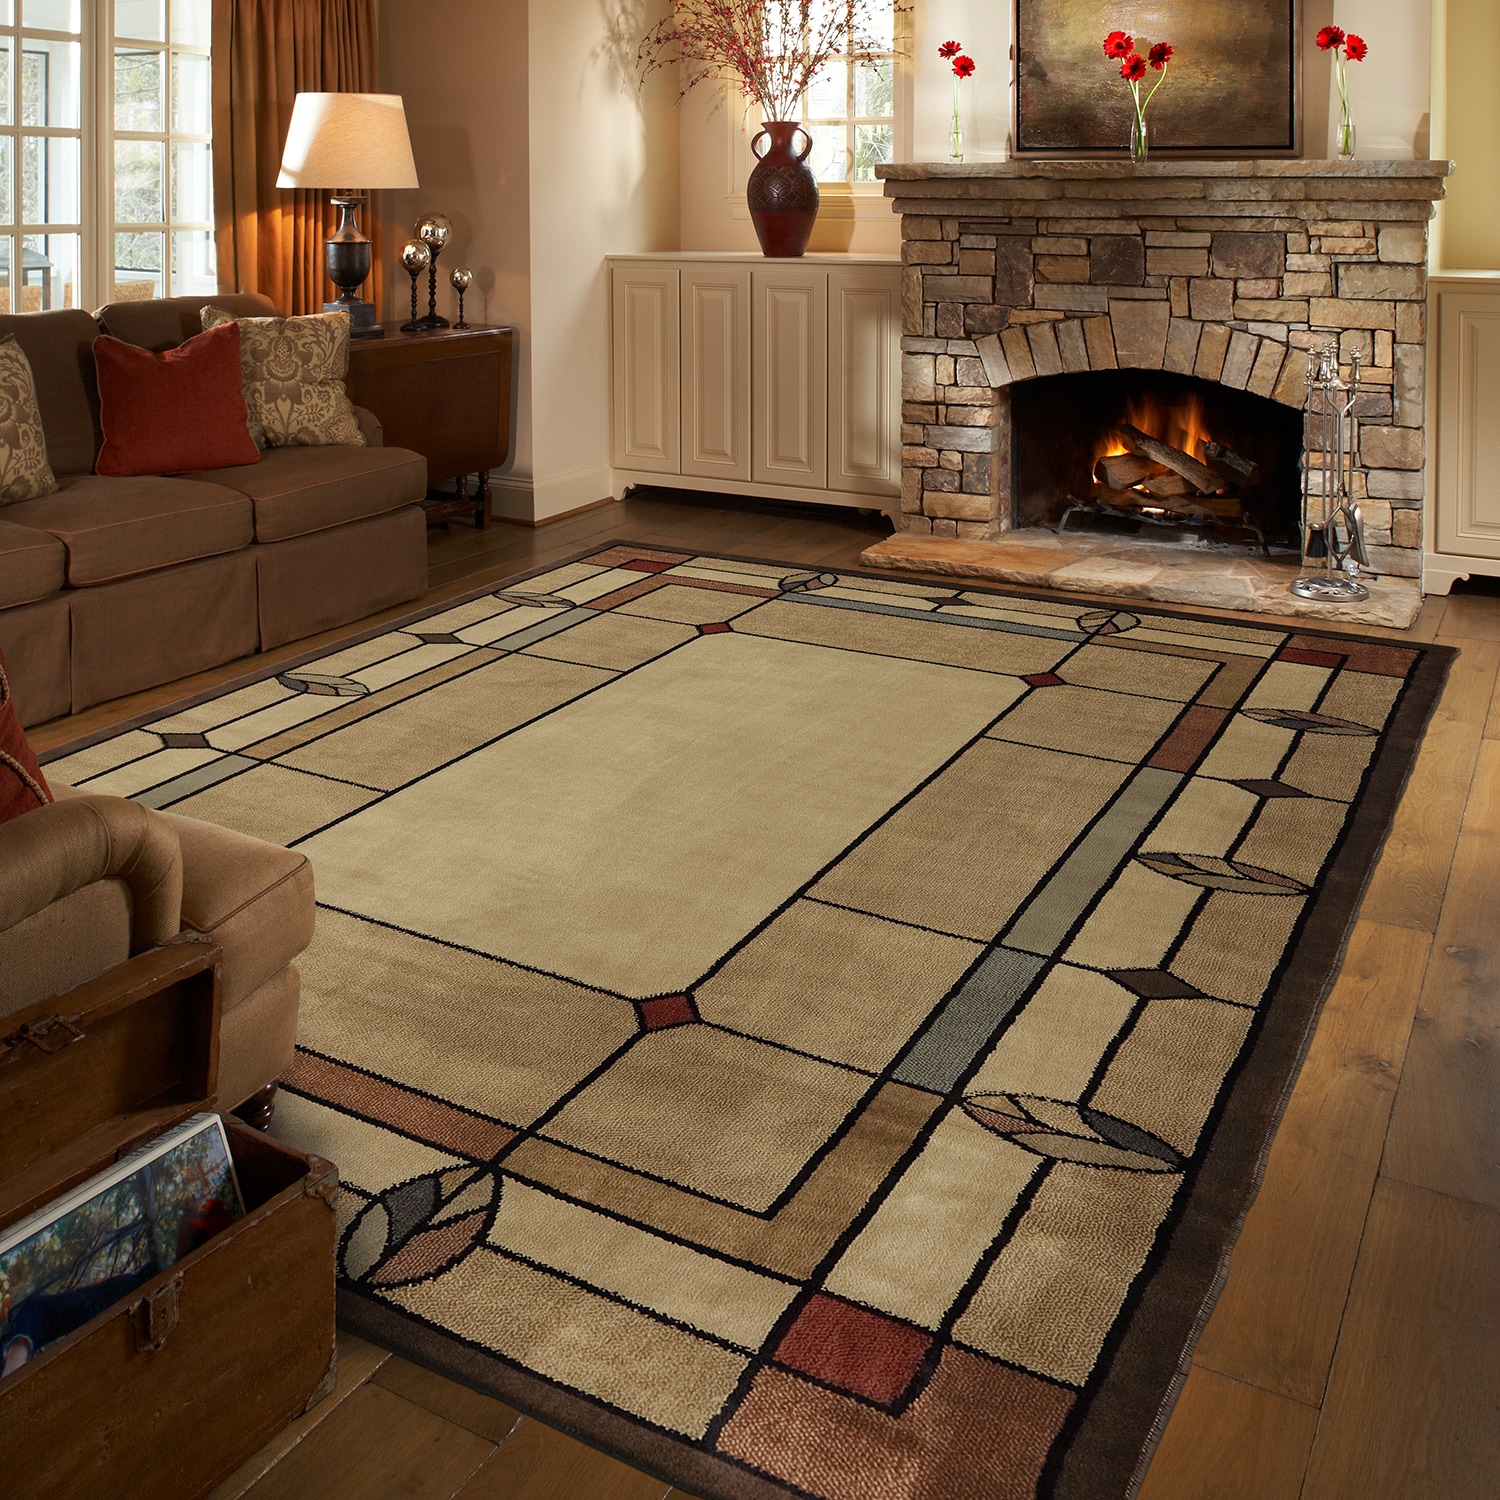 Mohawk Home Leaf Point 8 X 10 Brown Indoor Border Vintage Area Rug In The Rugs Department At Lowes Com